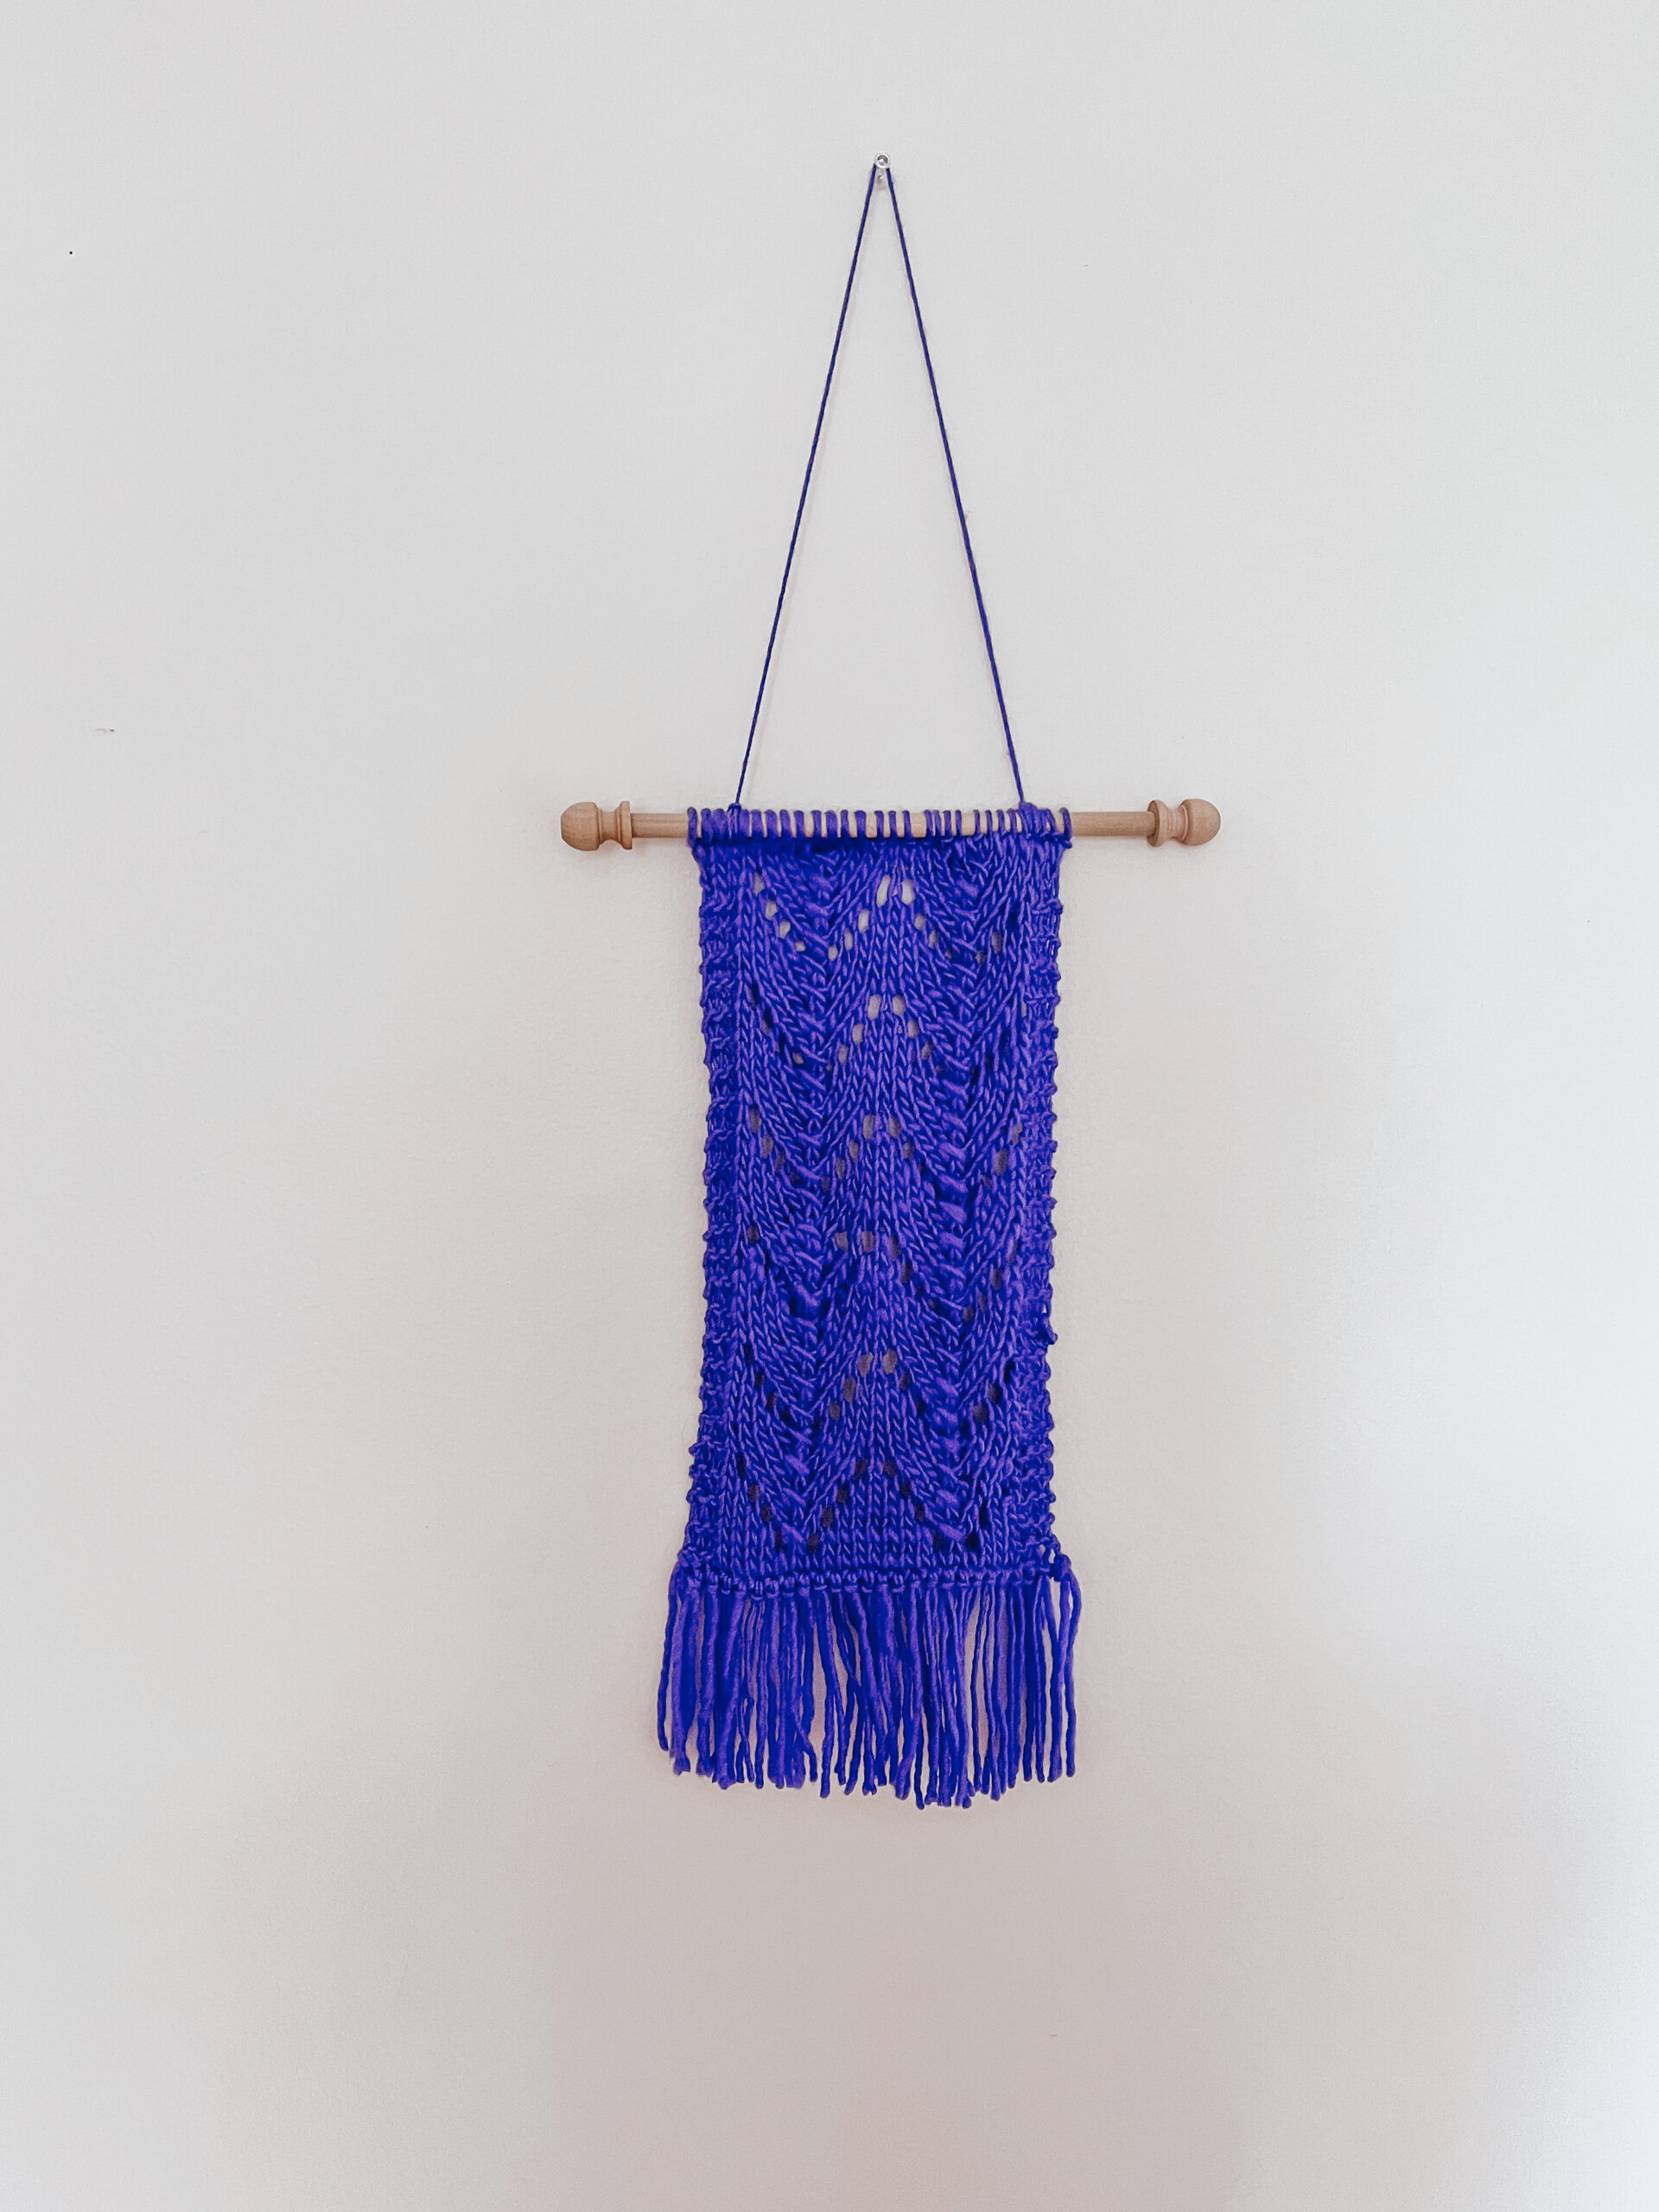 A periwinkle blue wool wall hanging is attached to a wooden dowel, hung from a longer string of wool. The hanging shows knitted chevrons in 2 columns with fringe on the bottom of the wall hanging.